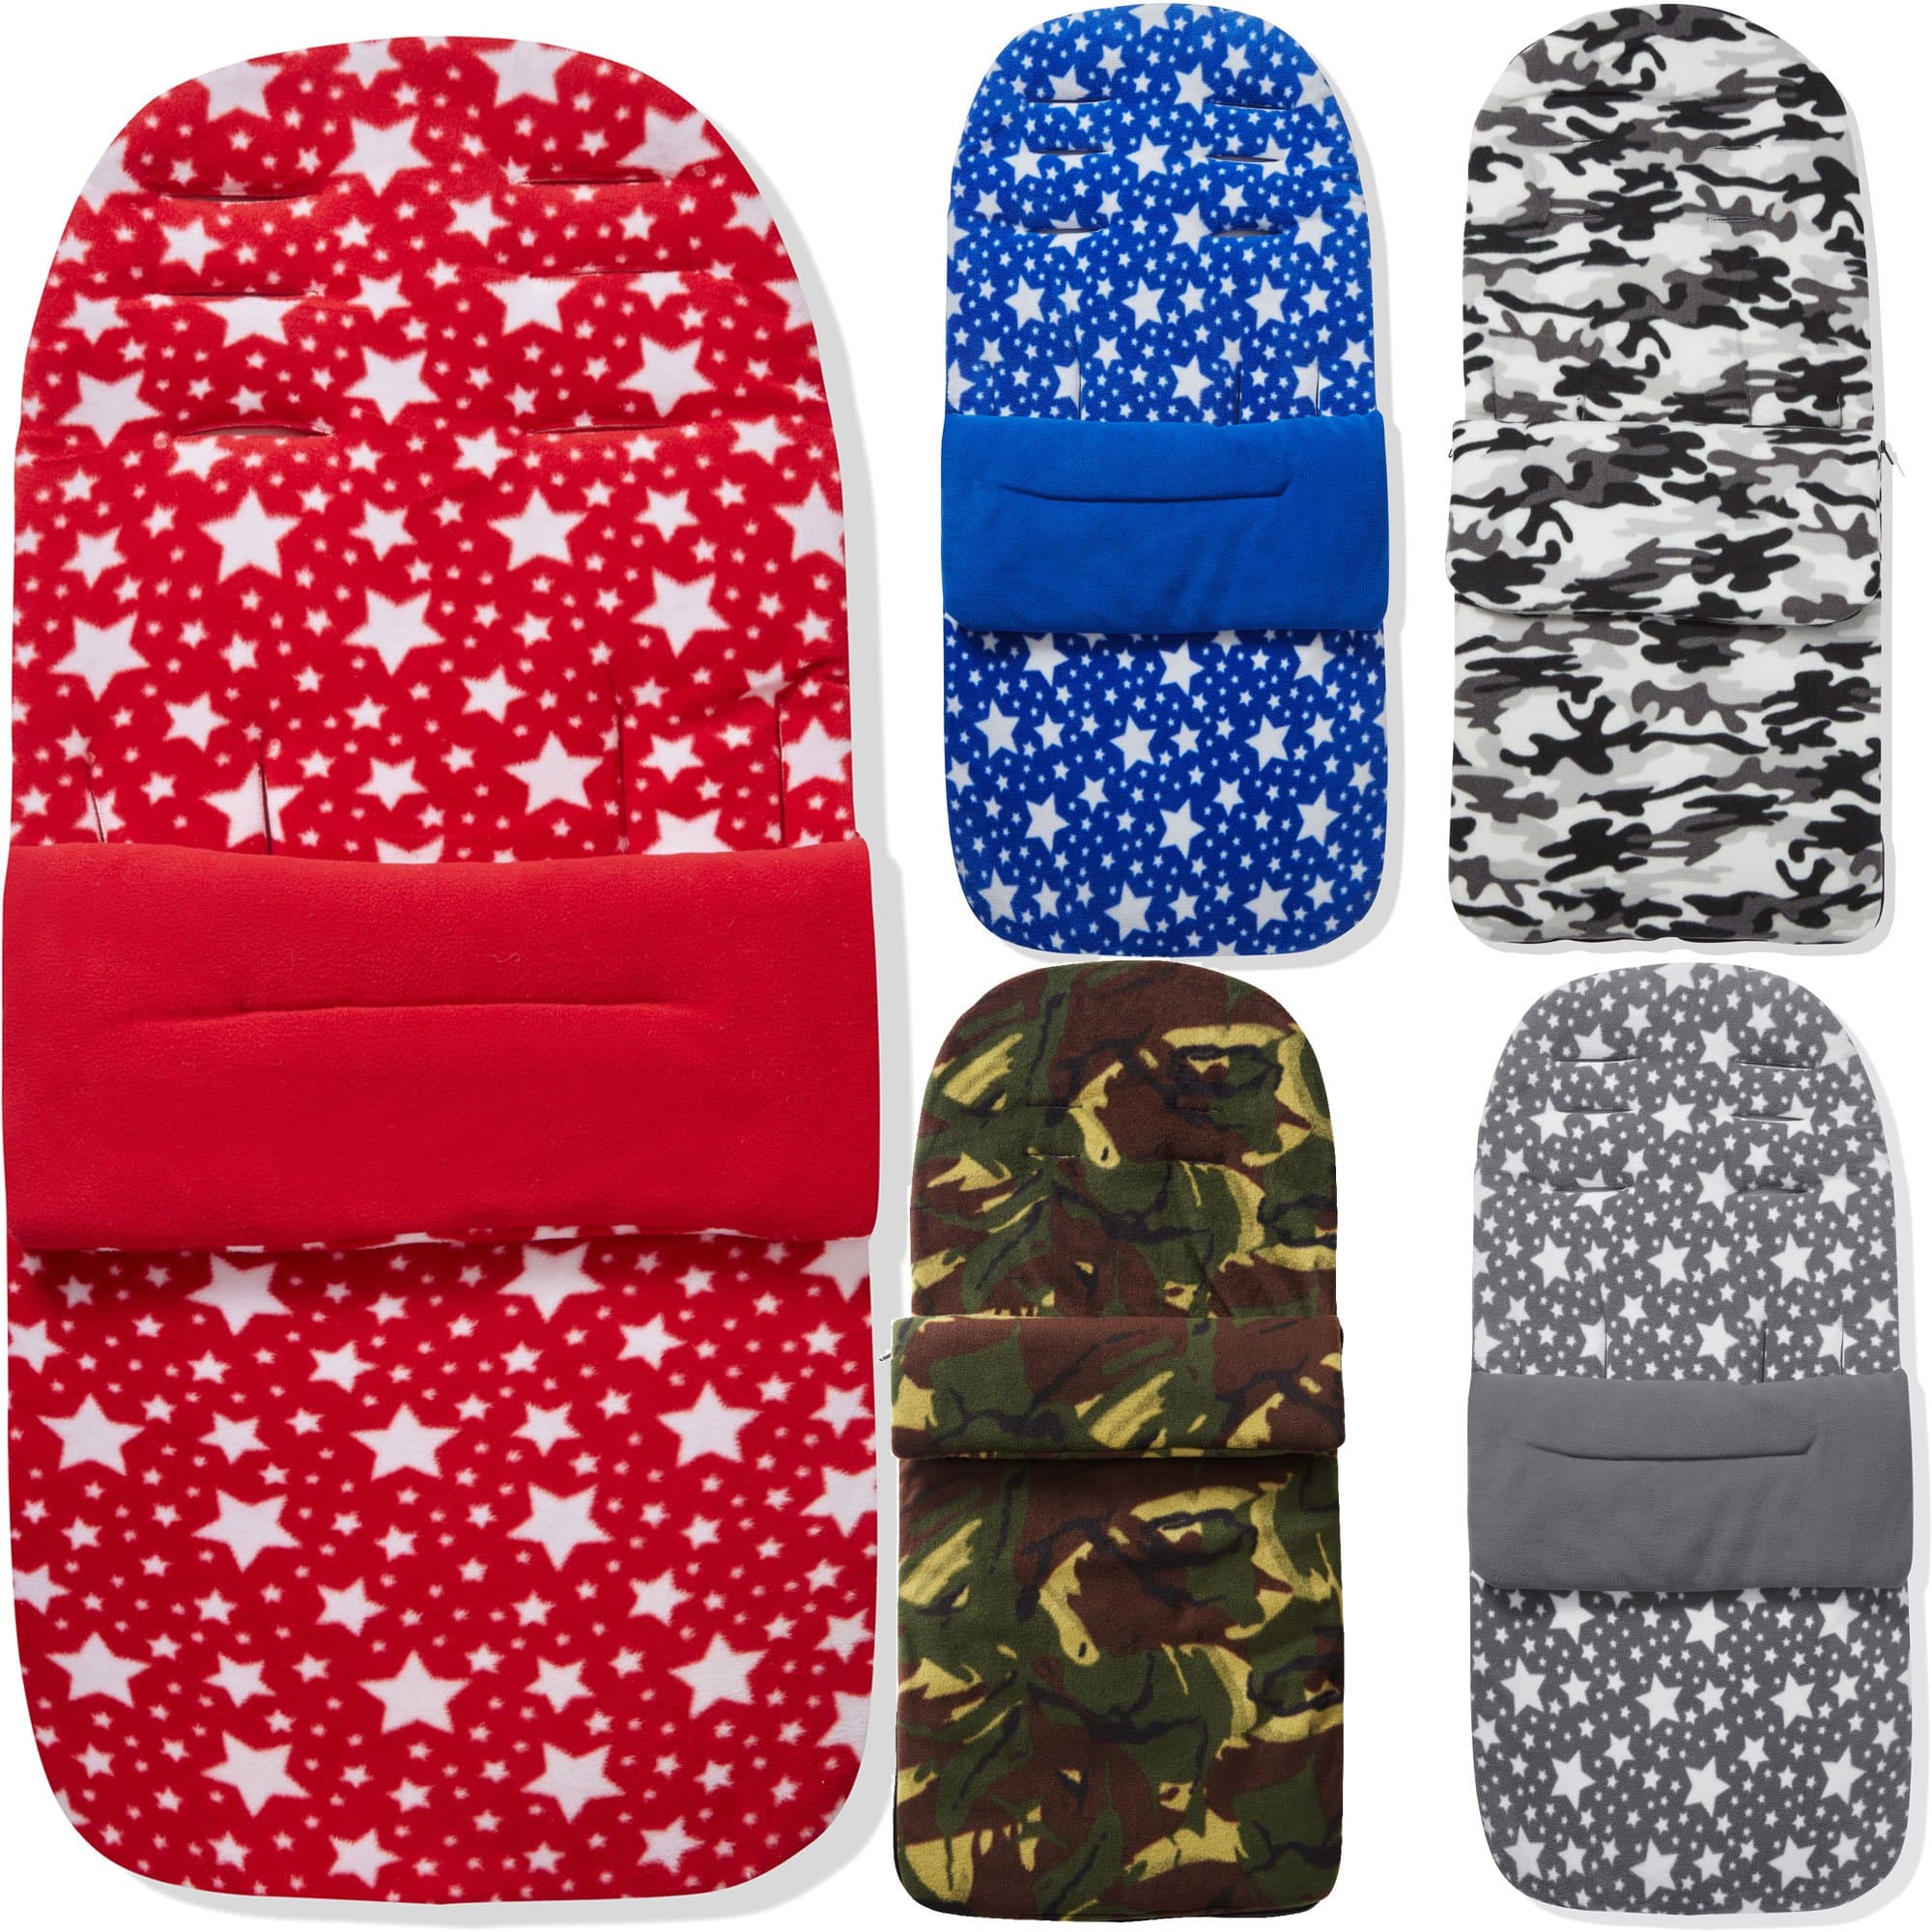 Universal Fleece Pushchair Footmuff / Cosy Toes - Fits All Pushchairs / Prams And Buggies - For Your Little One